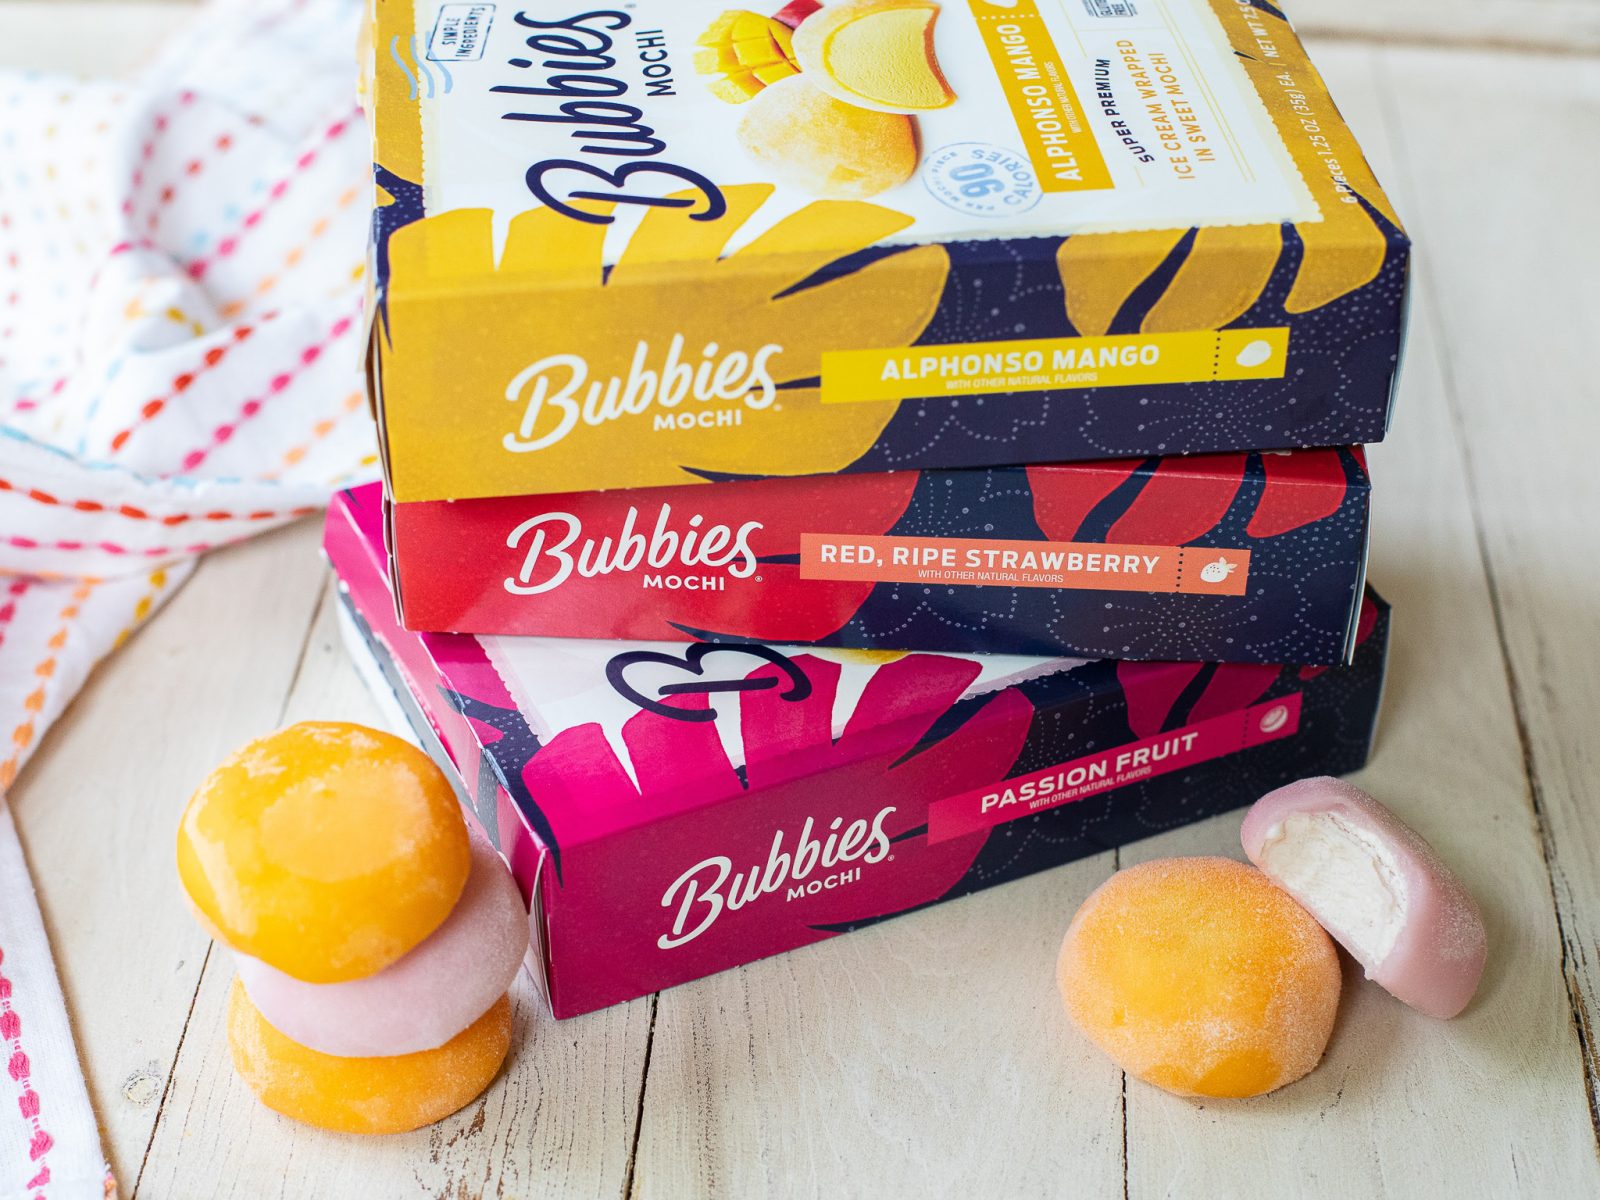 Enjoy Bubbies Mochi Ice Cream This Summer – Get The Boxes BOGO This Week At Publix